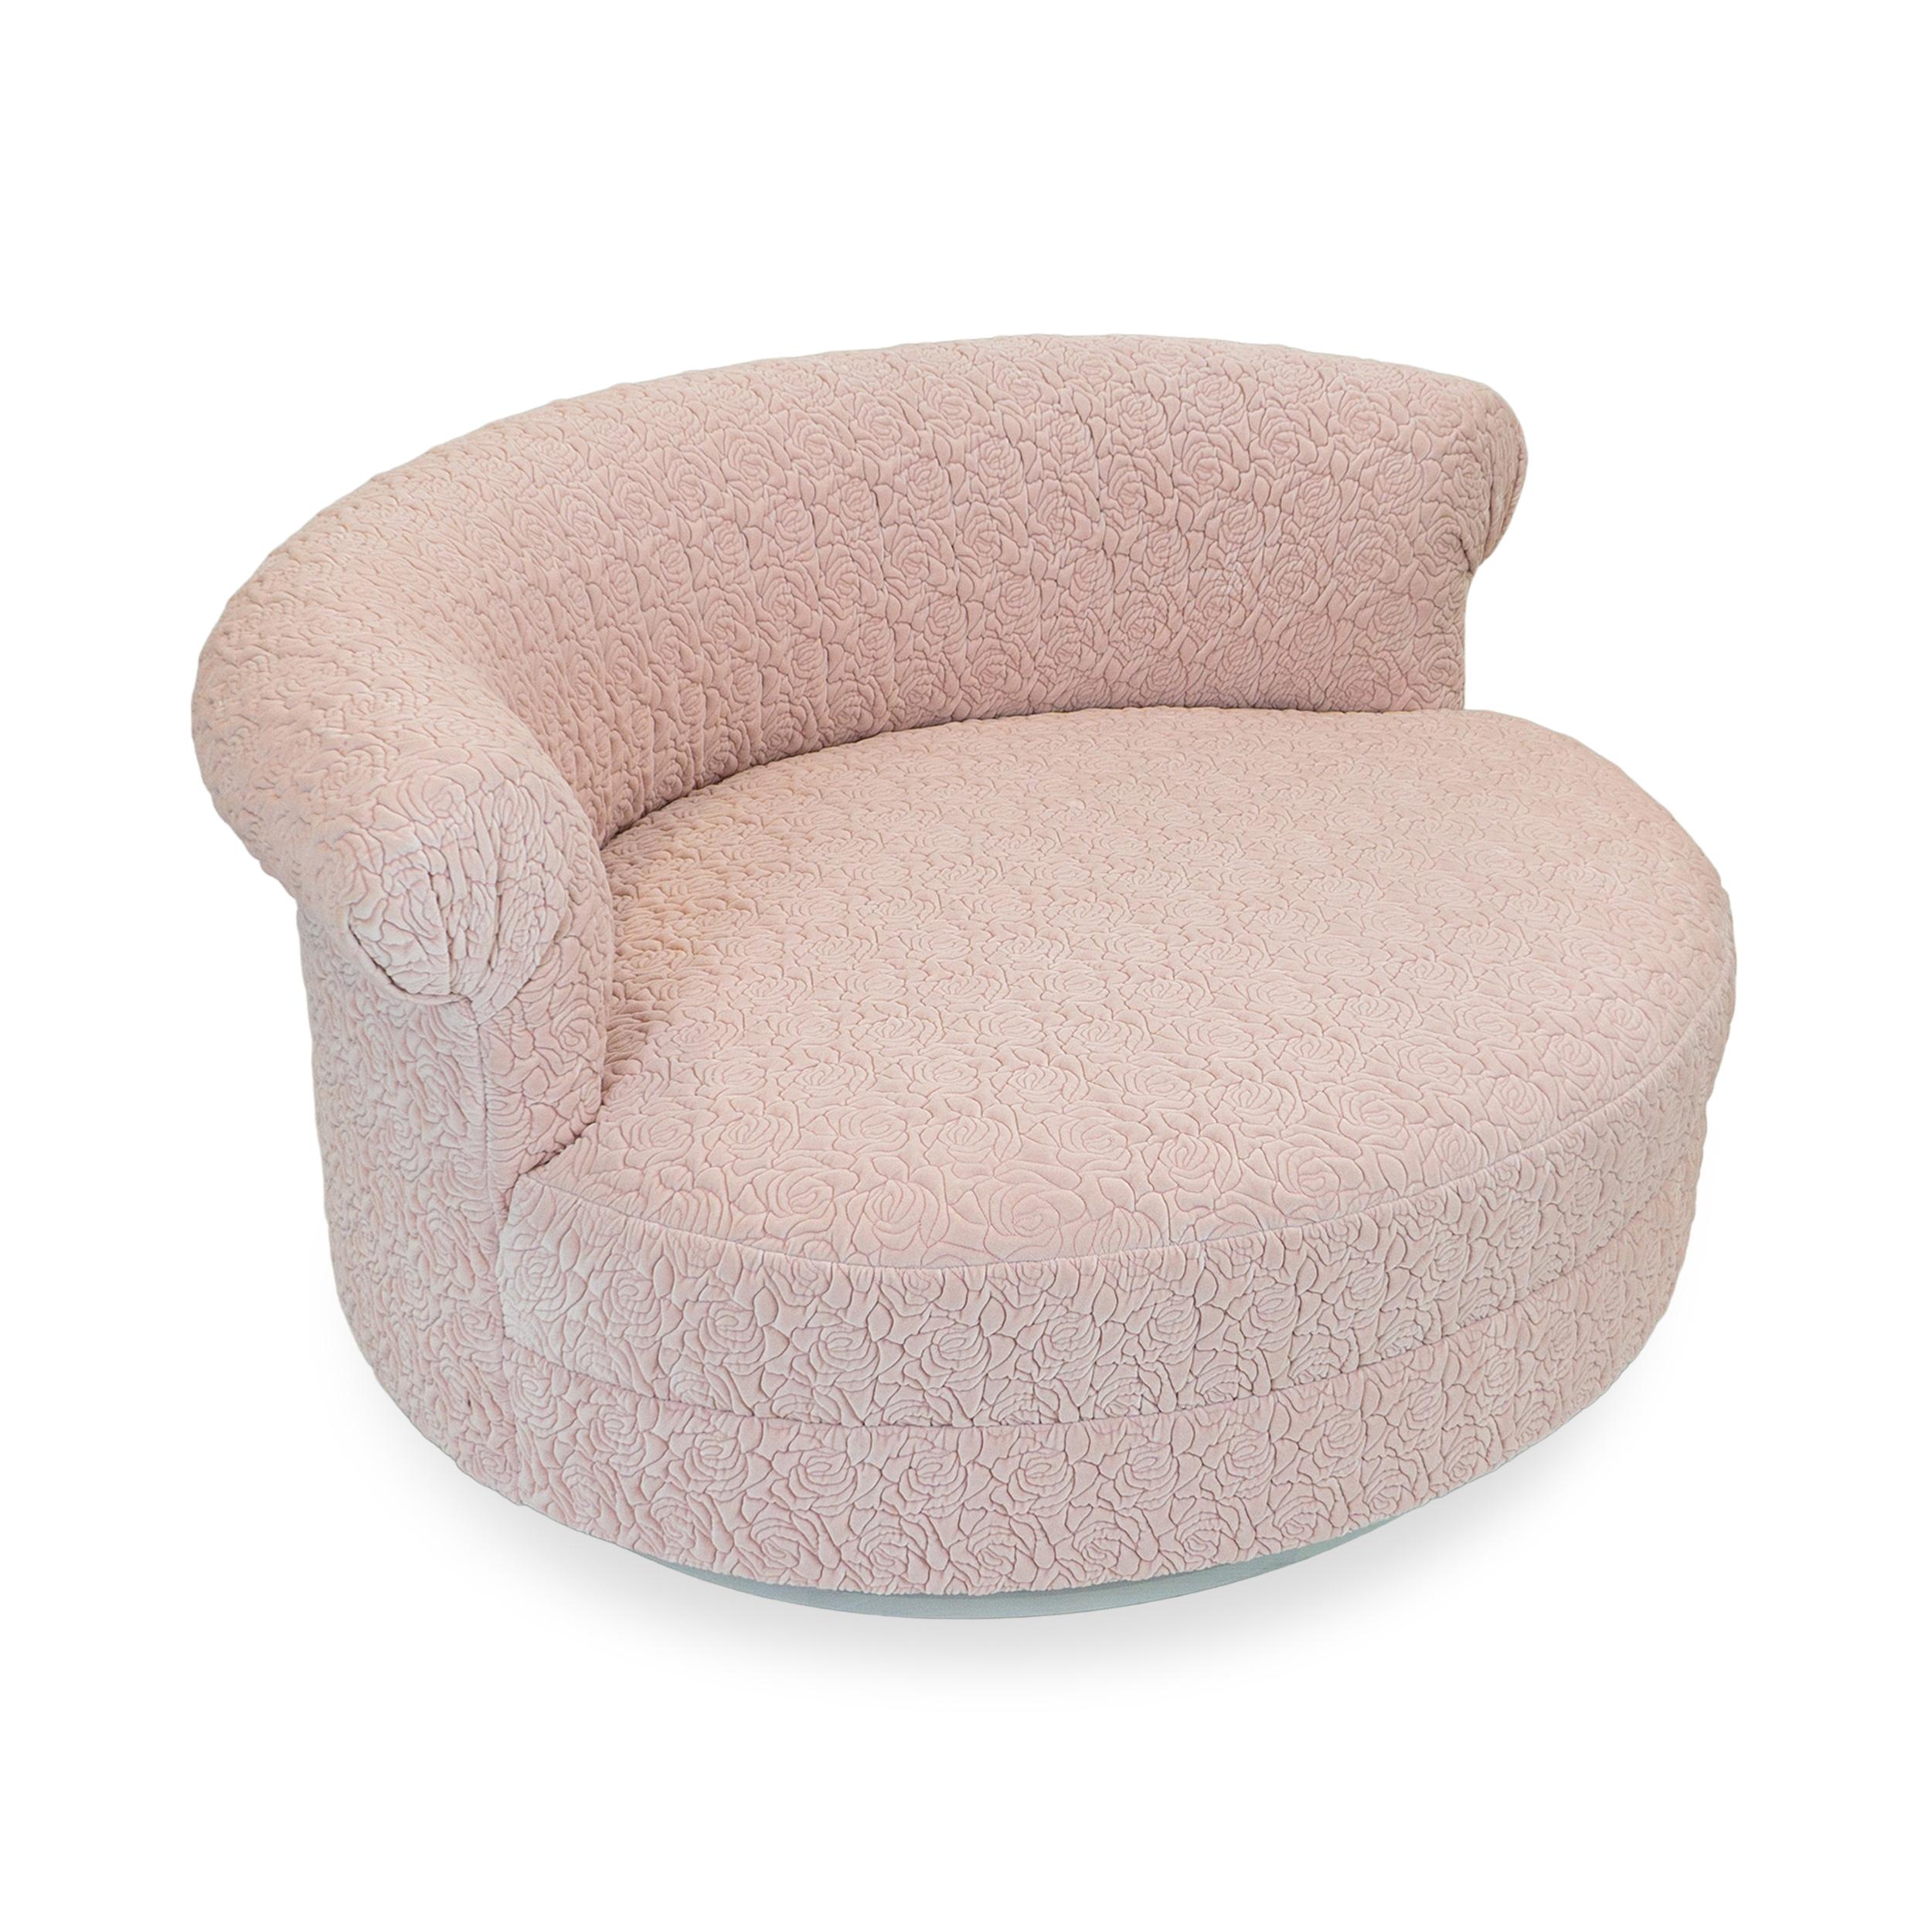 Customizable, just ask.
Oversized round lounge / club chair with recessed based and roll arm back. Upholstered with eight-way hand-tied springs and high density foam. Features performance quilted rose fabric in light pink which comes in other